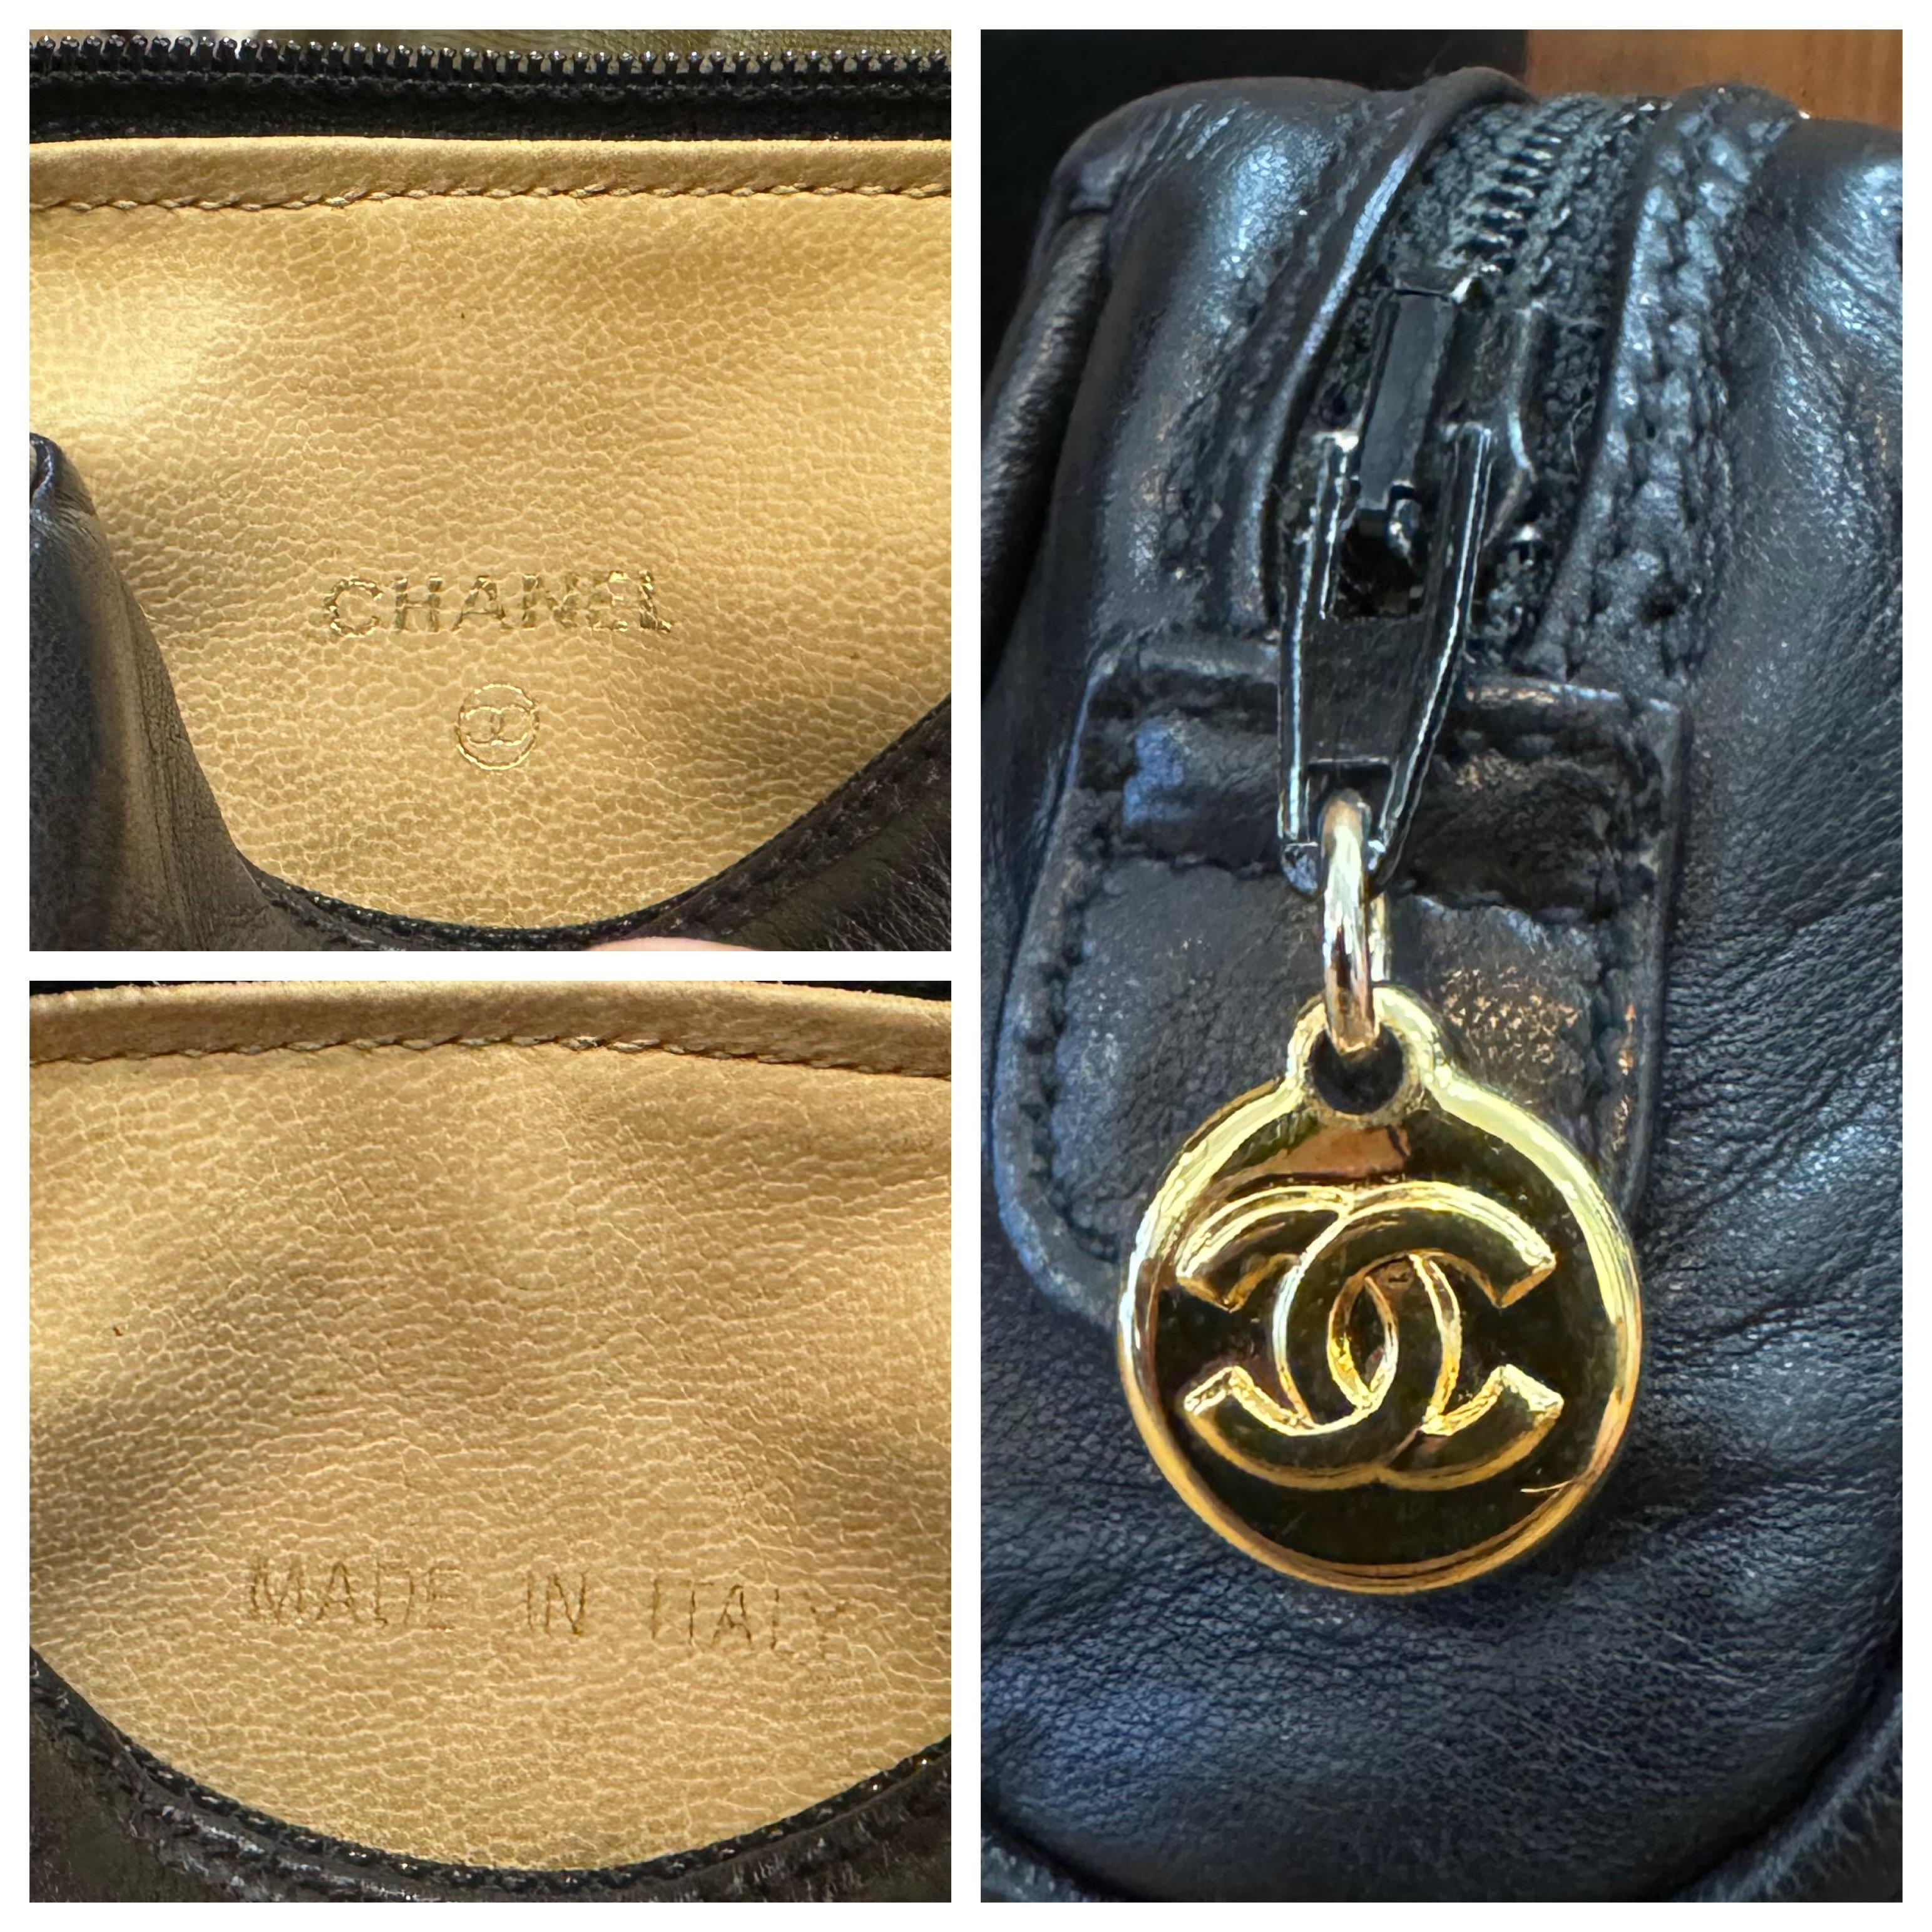 1996 Vintage CHANEL Mini Calfskin Leather Lipstick Coin Pouch Black For Sale 1